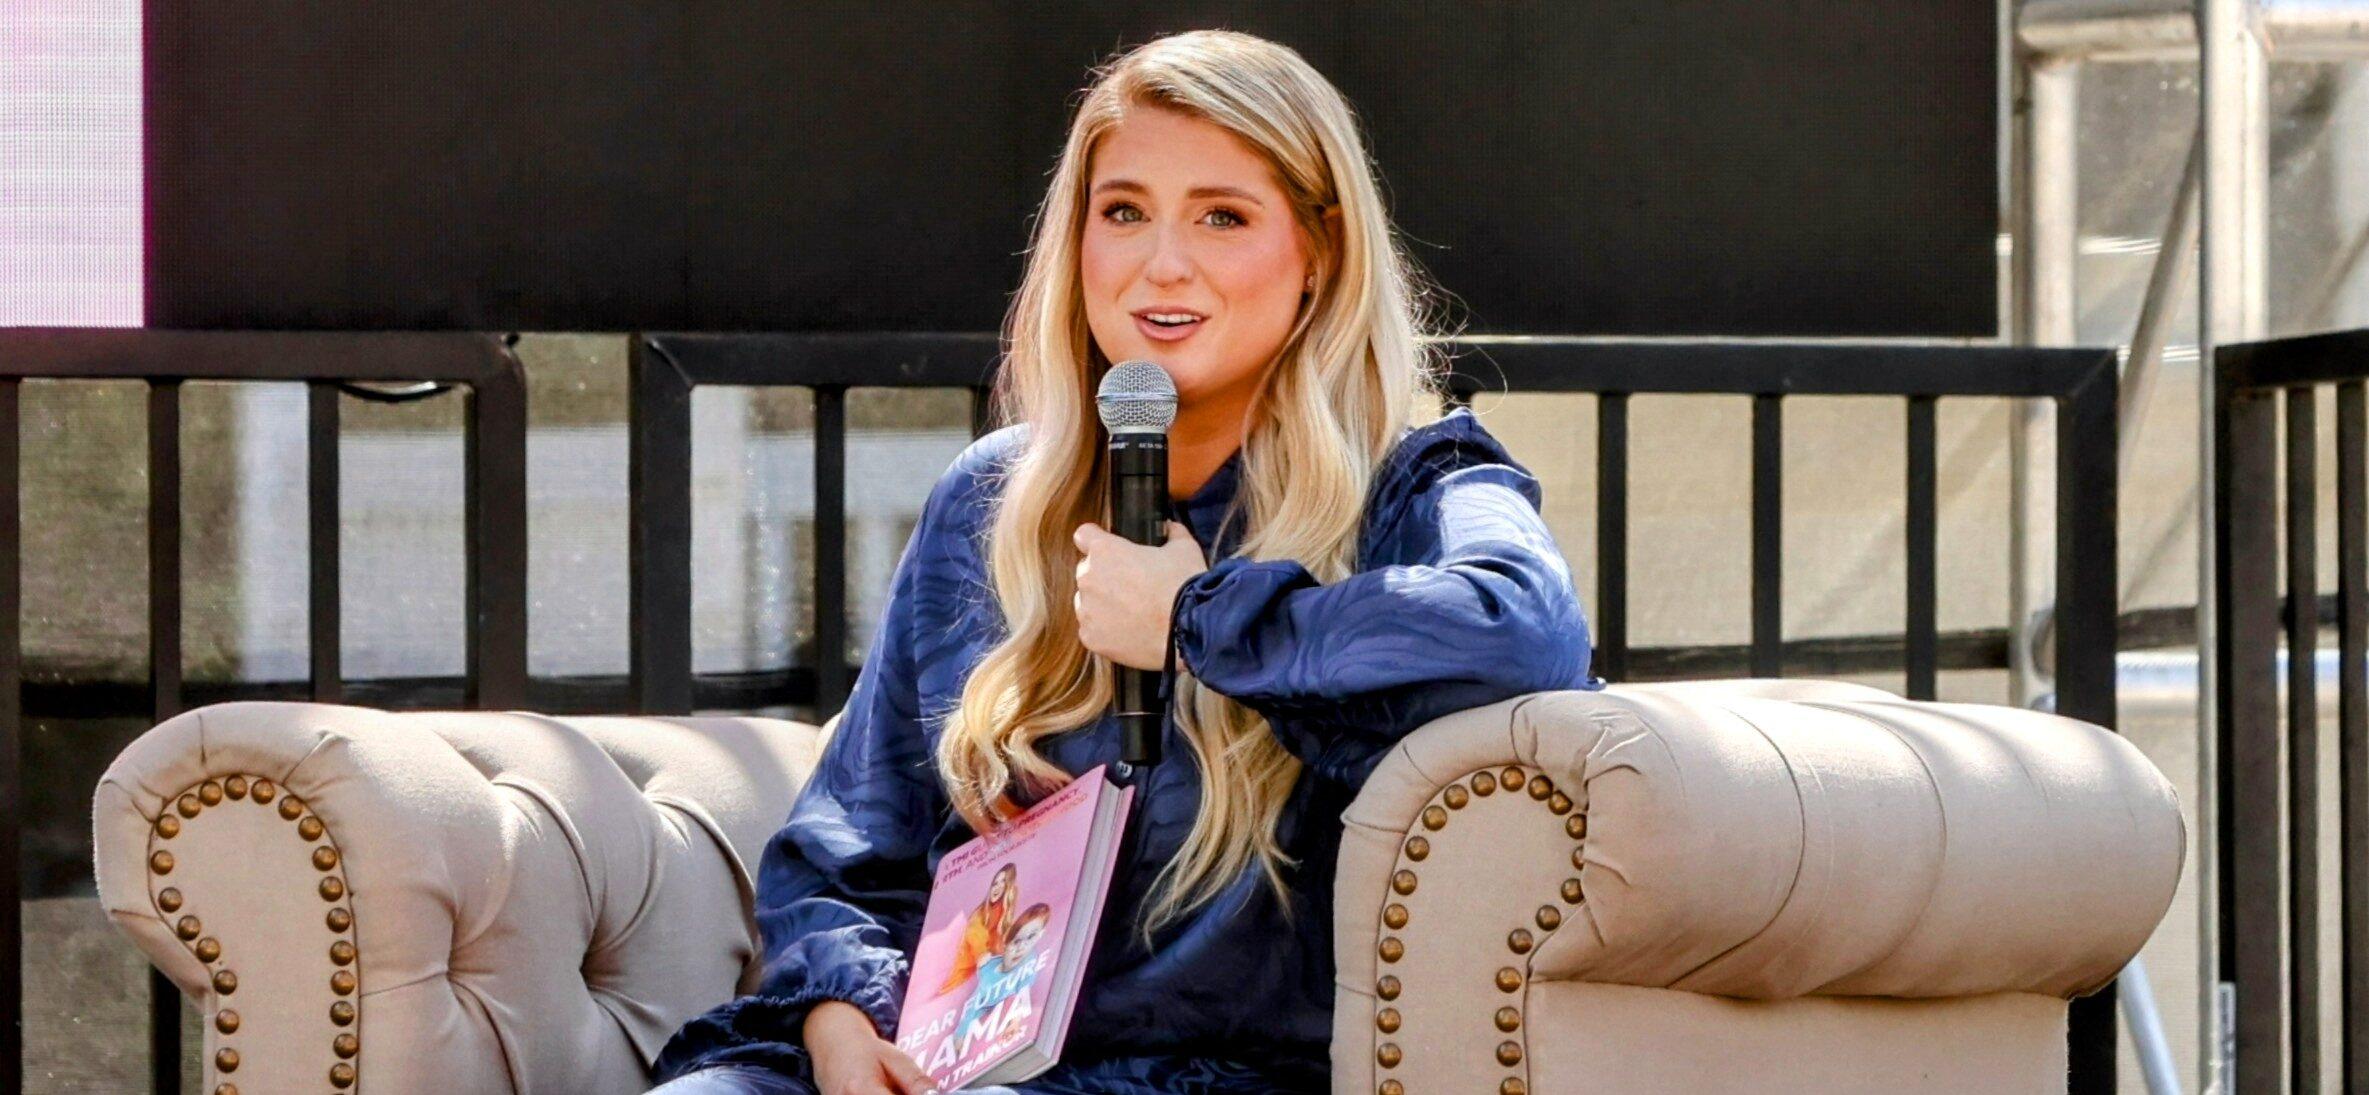 Meghan Trainor Issues Apology For Insensitive Comments About Teachers During Podcast